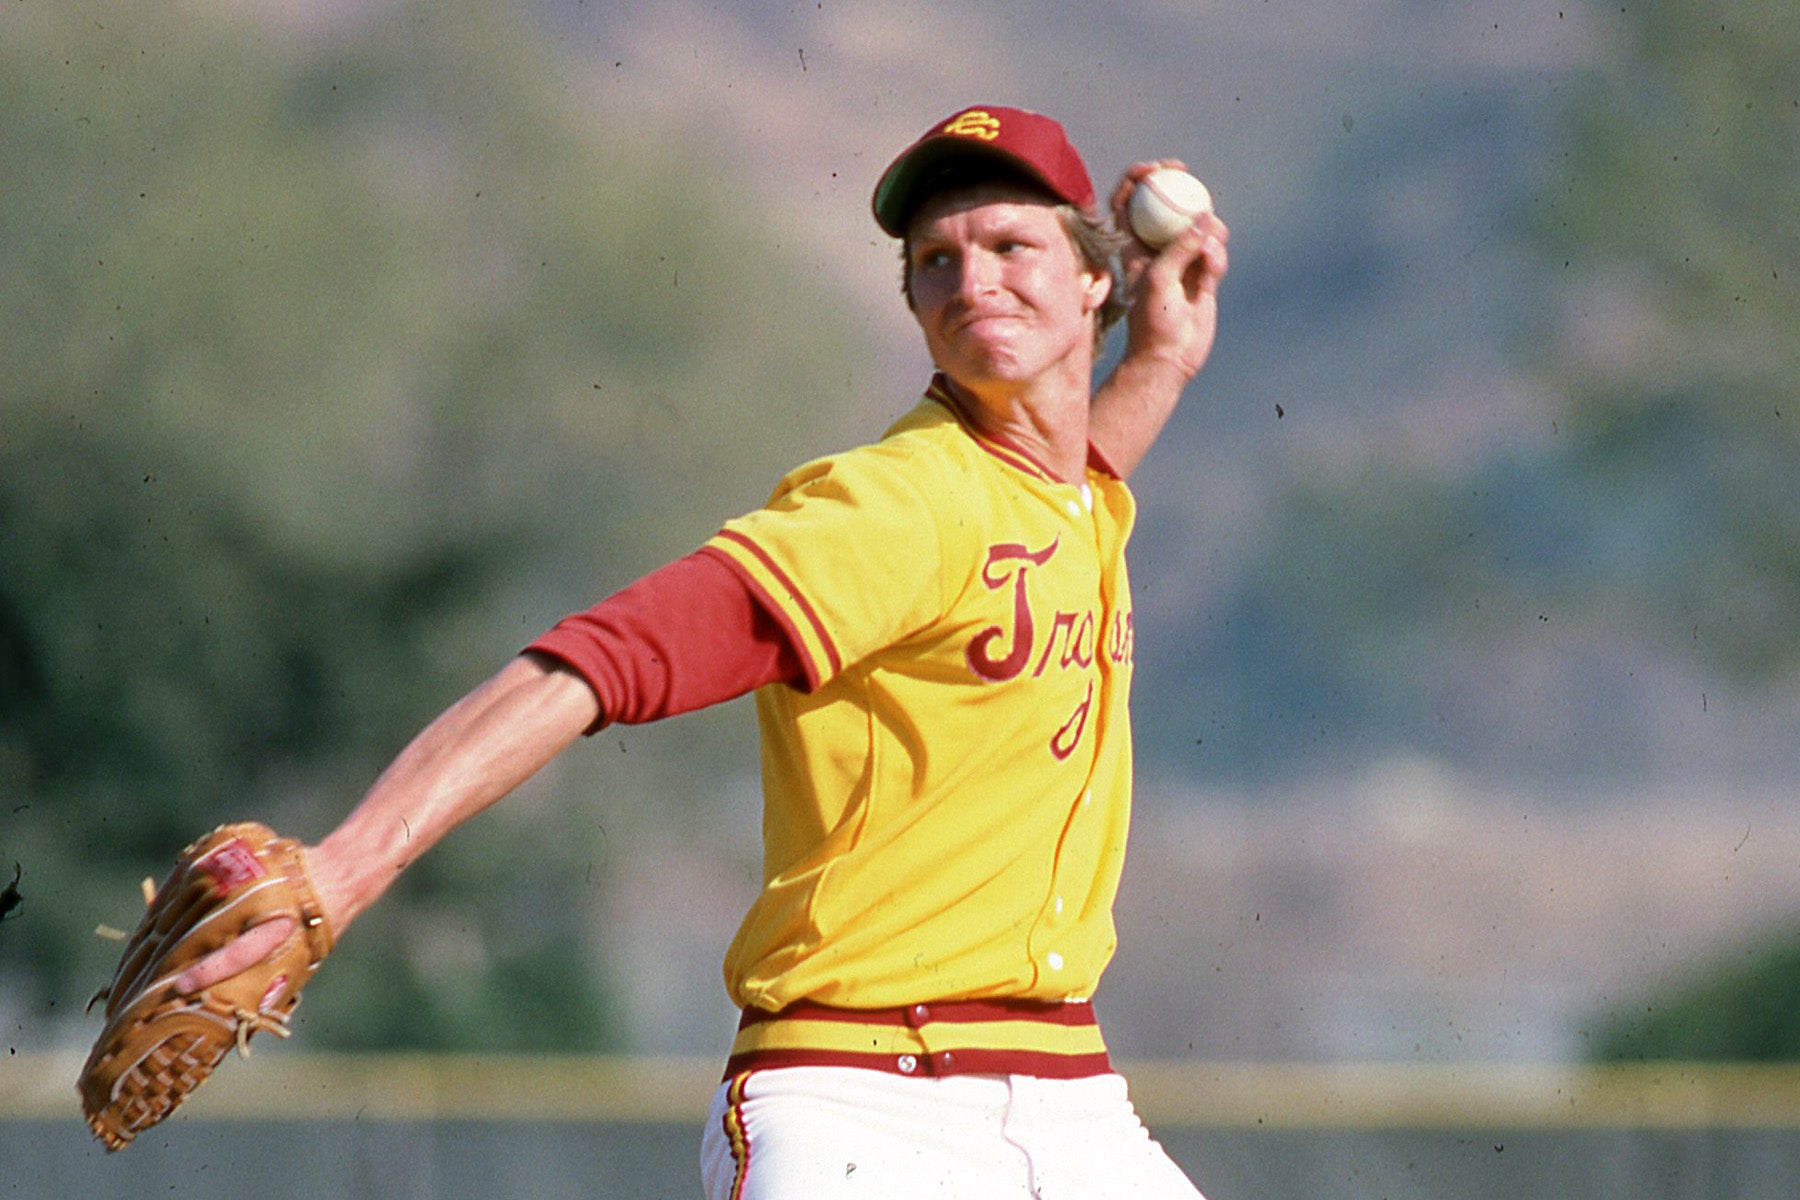 Randy Johnson pitching for the USC Trojans in 1984 : r/baseball